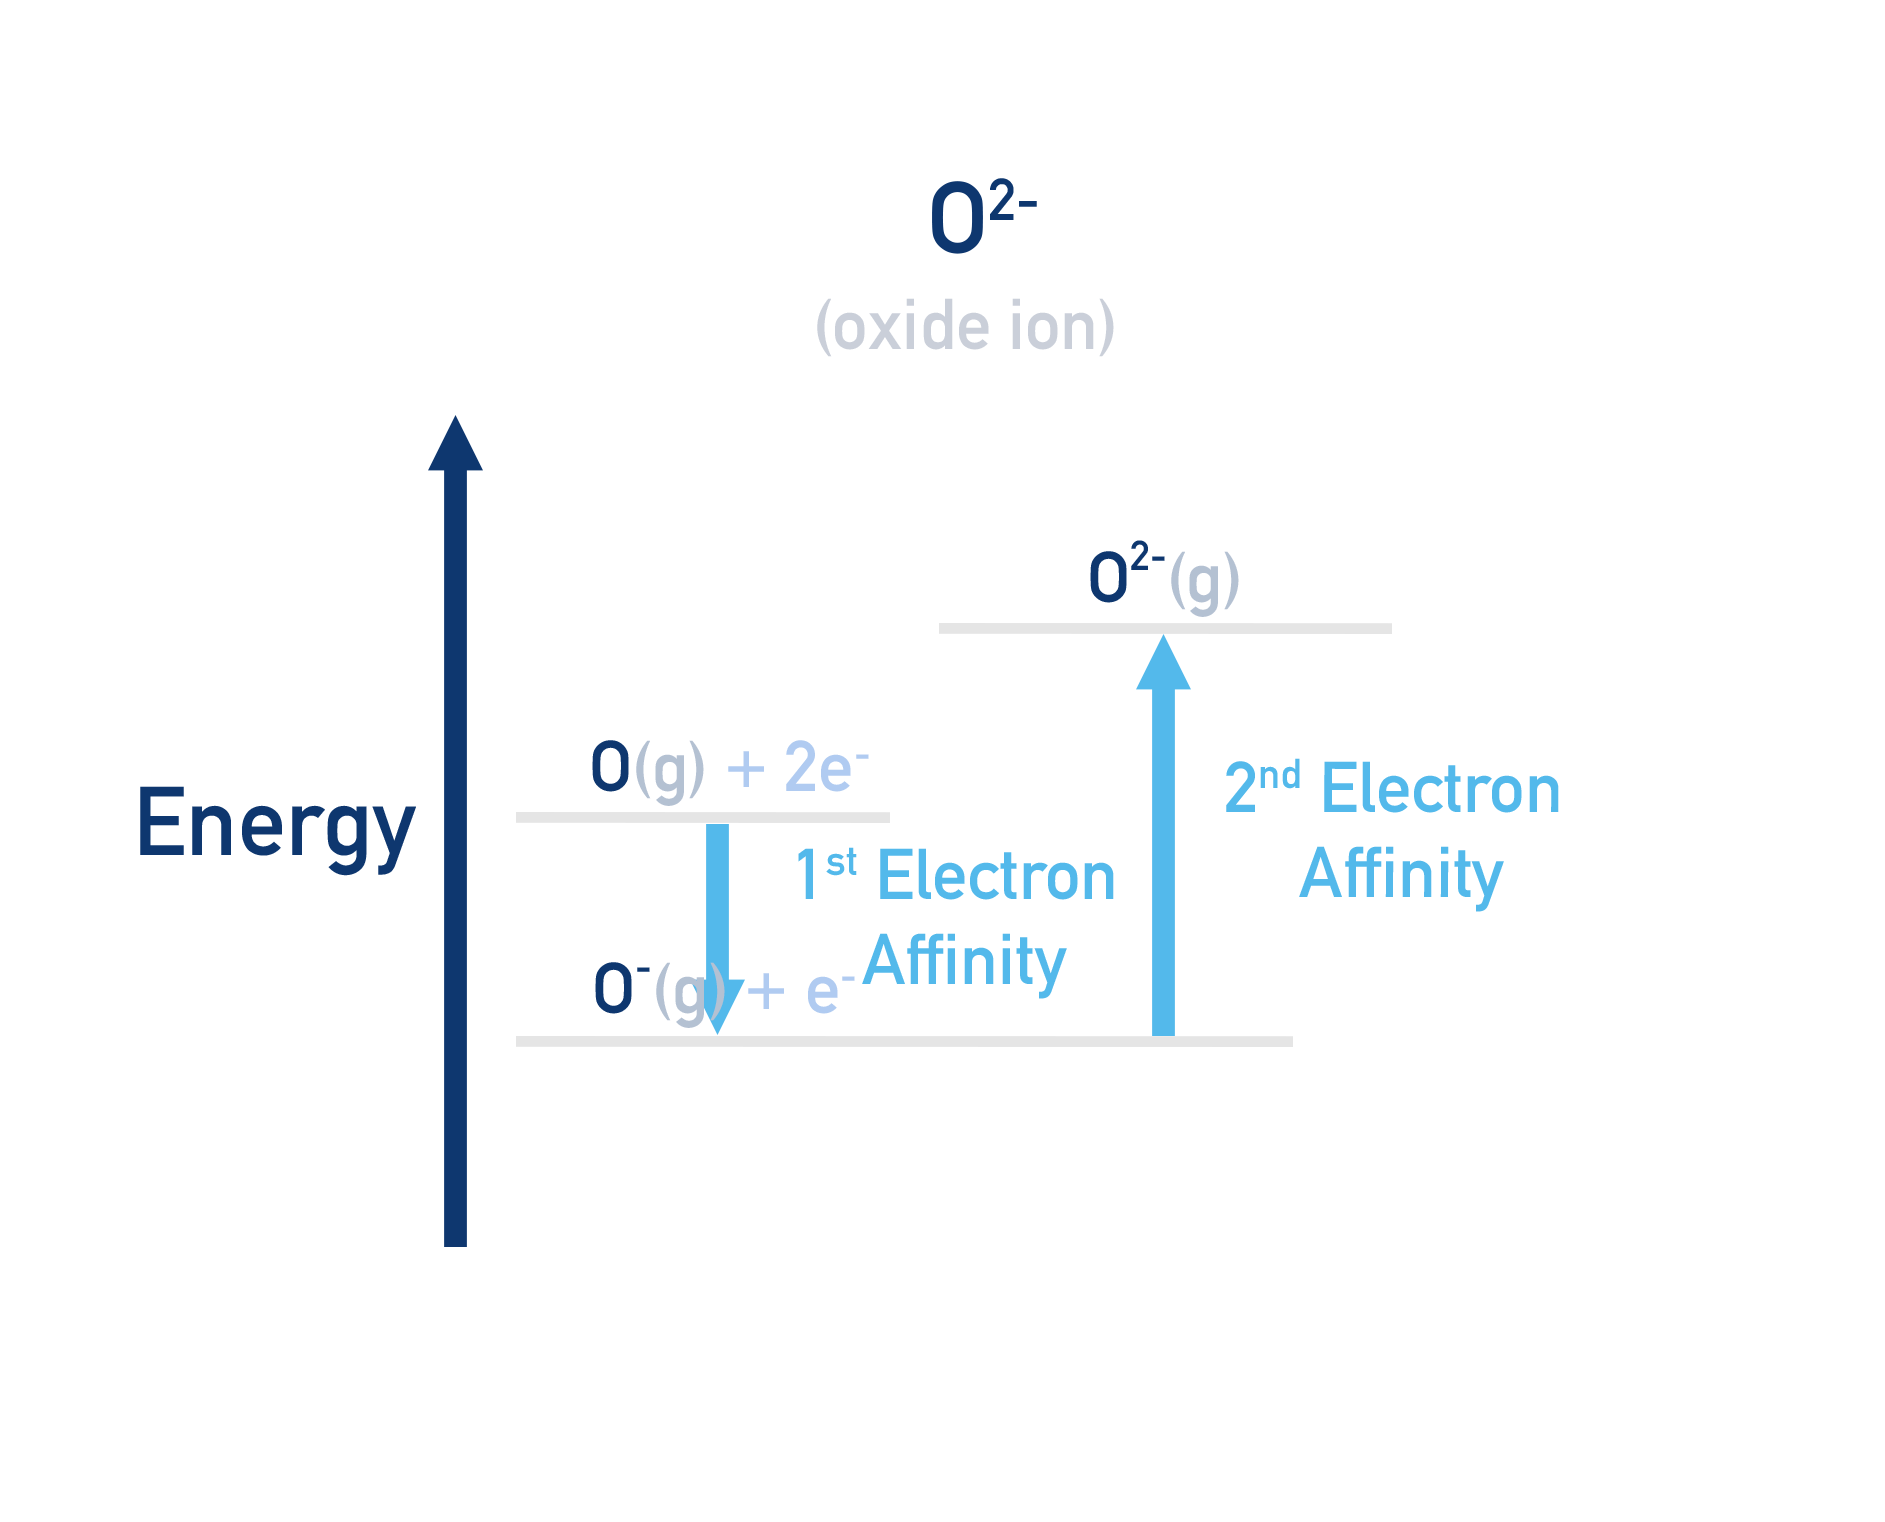 oxide ion formation successive electron affinities a-level chemistry